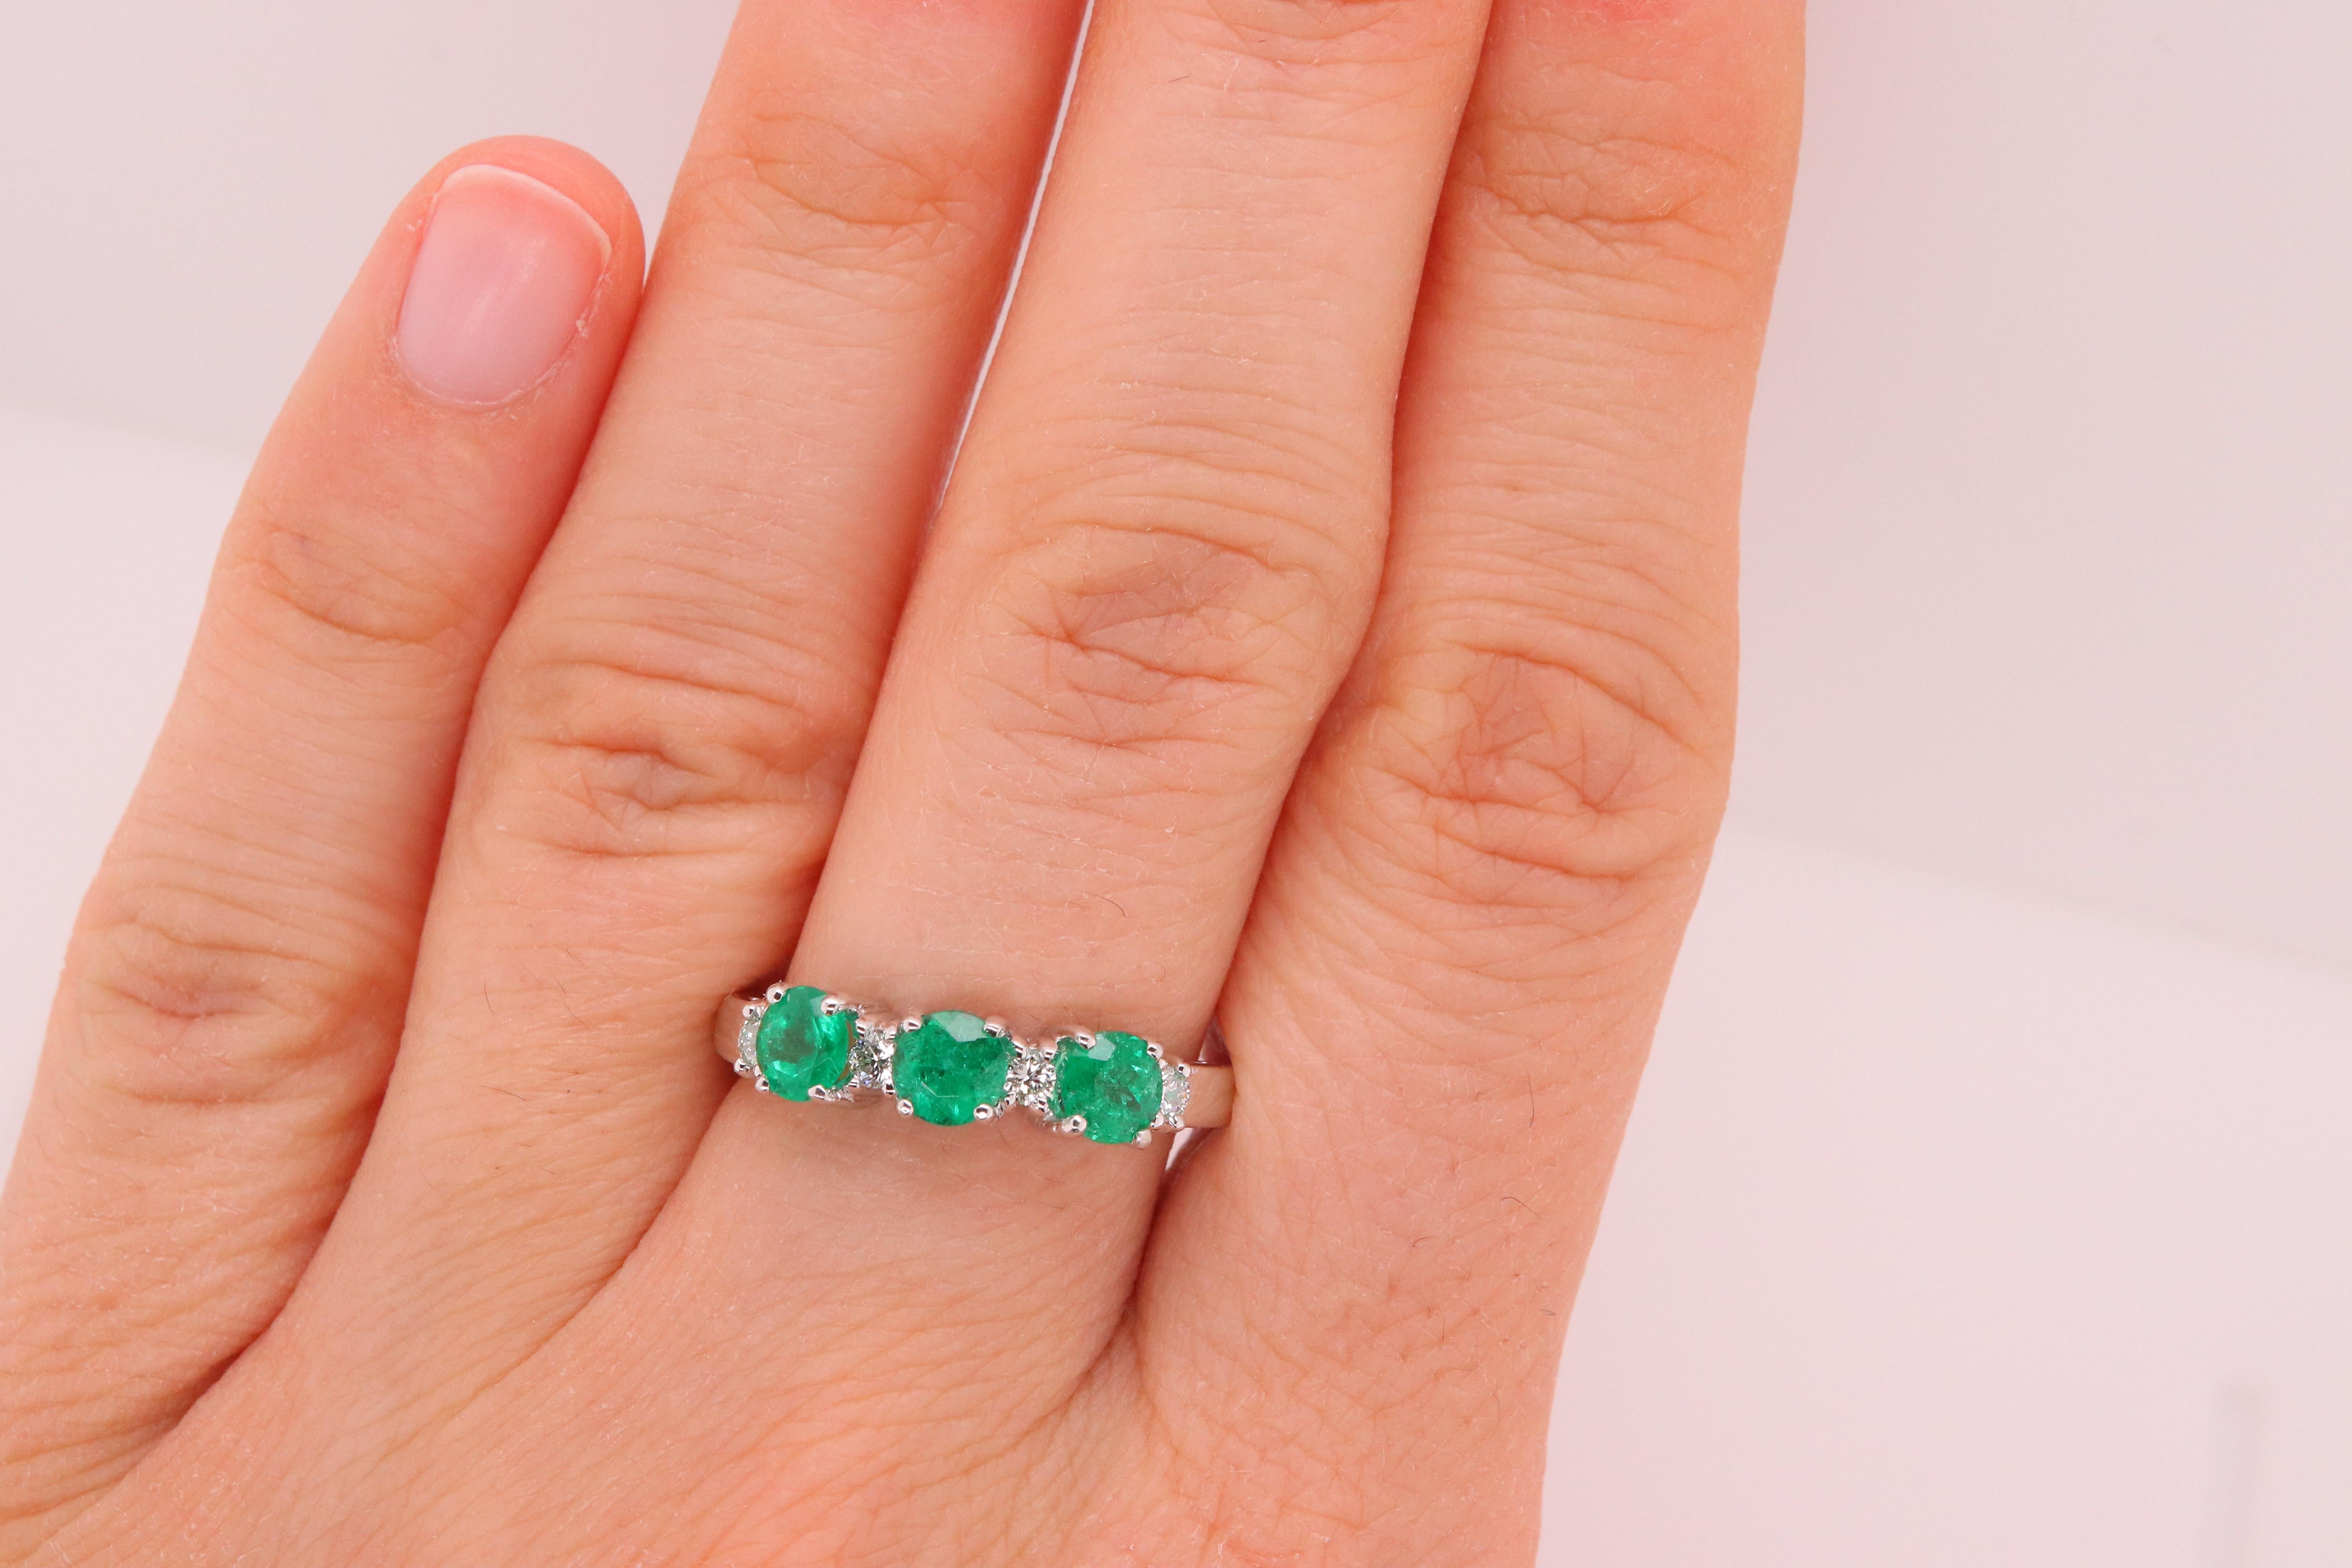 Material: 14k White Gold 
Stone Details: 3 Round Emeralds at 0.91 Carats - Measuring 4 mm
Diamond Details: 4 Brilliant Round Diamonds at 0.14 Carats - Clarity: SI / Color: H-I
Ring Size: 7. Alberto offers complimentary sizing on all rings.

Fine